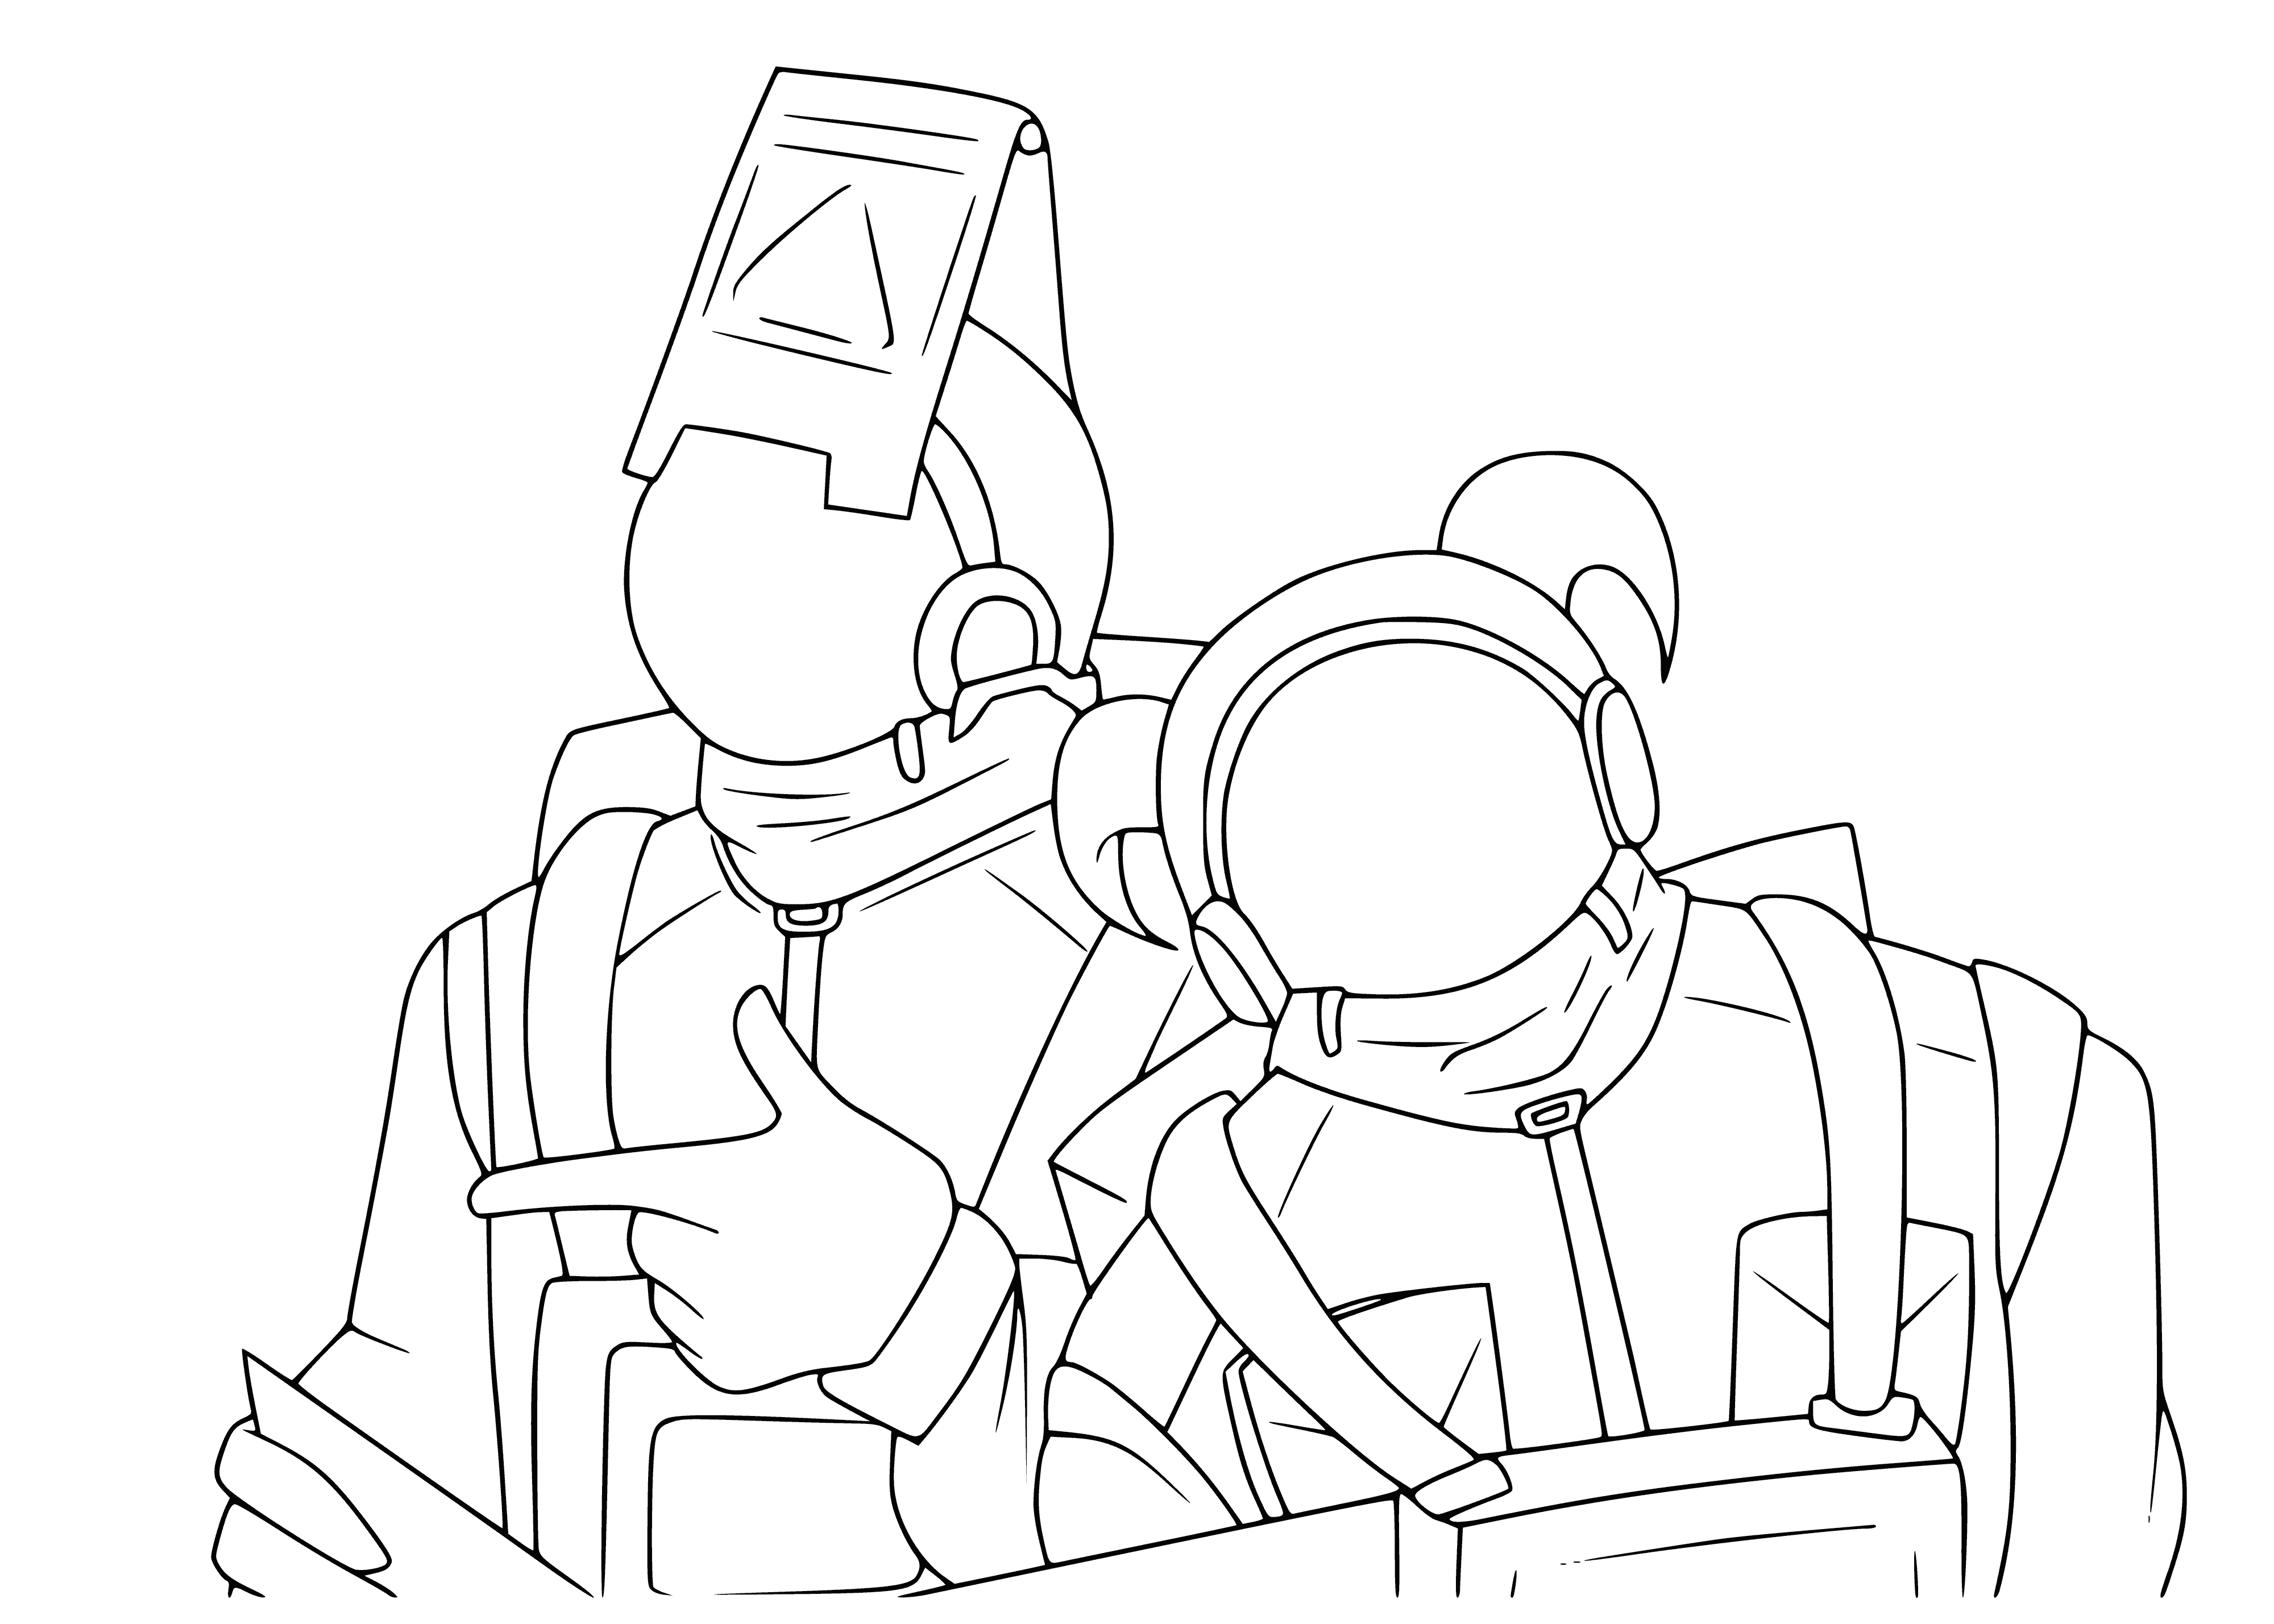 coloring page: Figures in room holding tools: one shorter, helmeted w/ green visor.